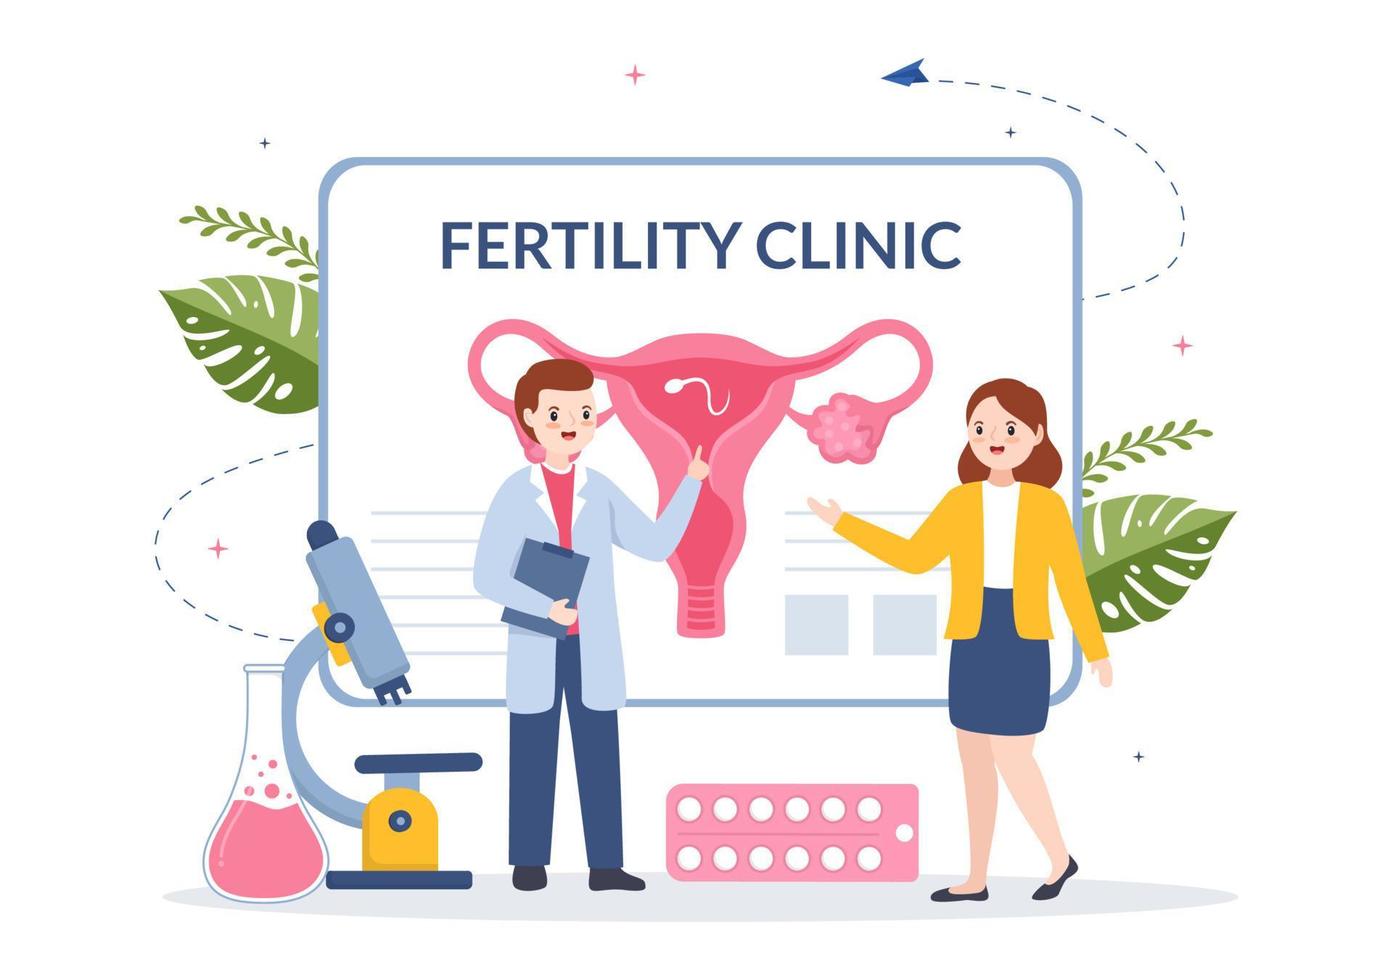 Fertility Clinic on Infertility Treatment for Couples and Handles in Vitro Fertilization Programs in Flat Cartoon Hand Drawn Templates Illustration vector